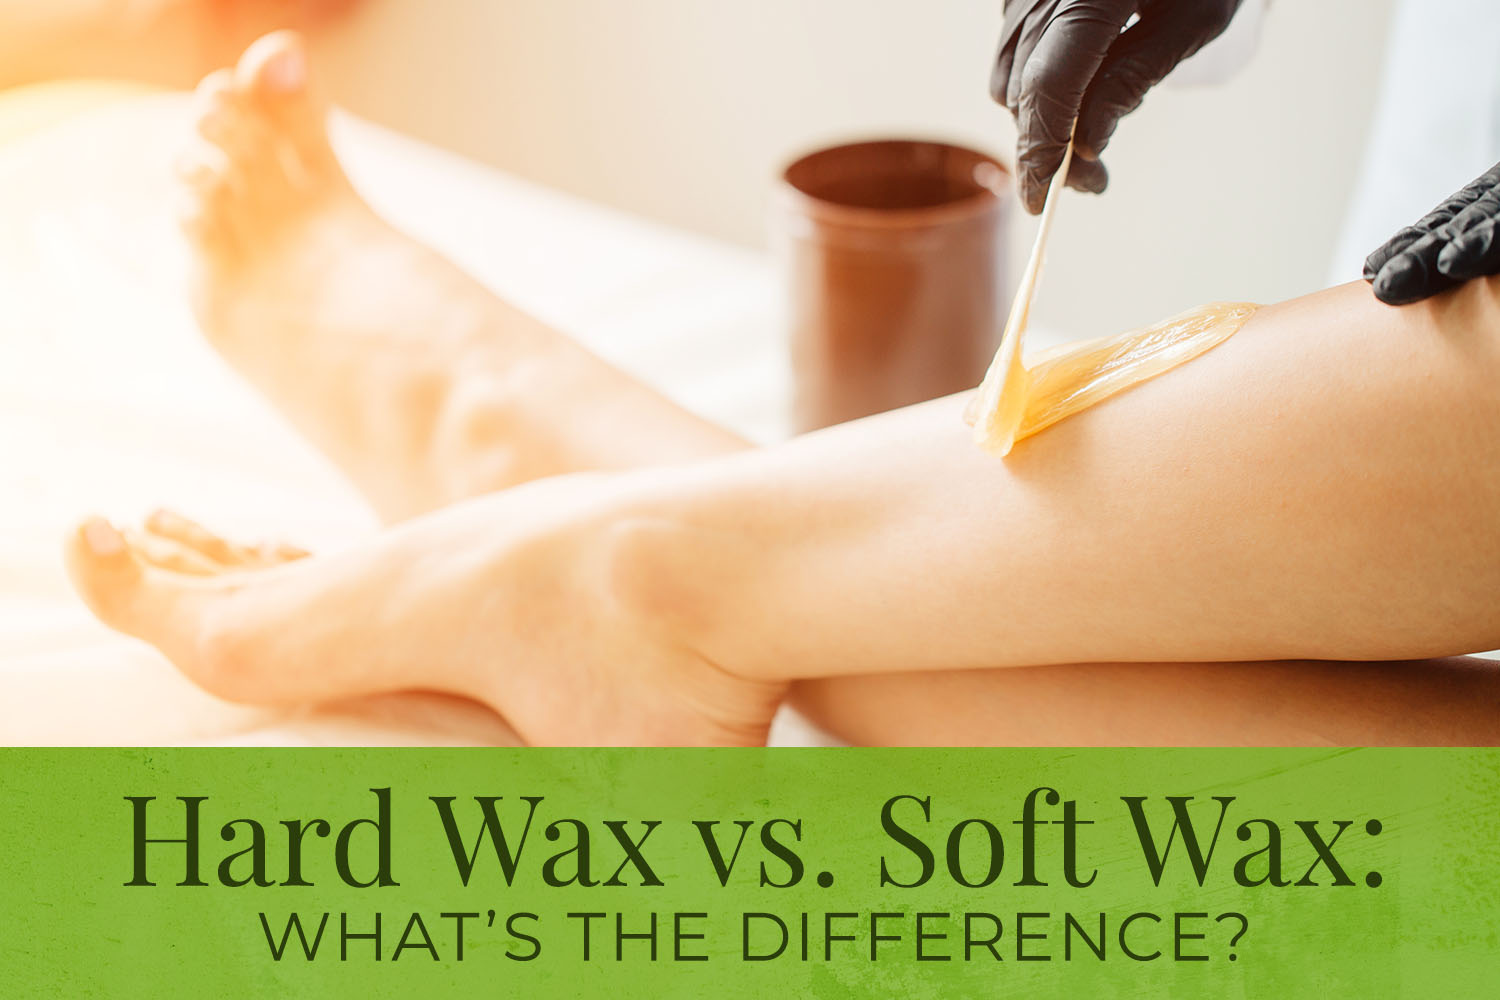 Hard Wax or Soft Wax: What's the difference?